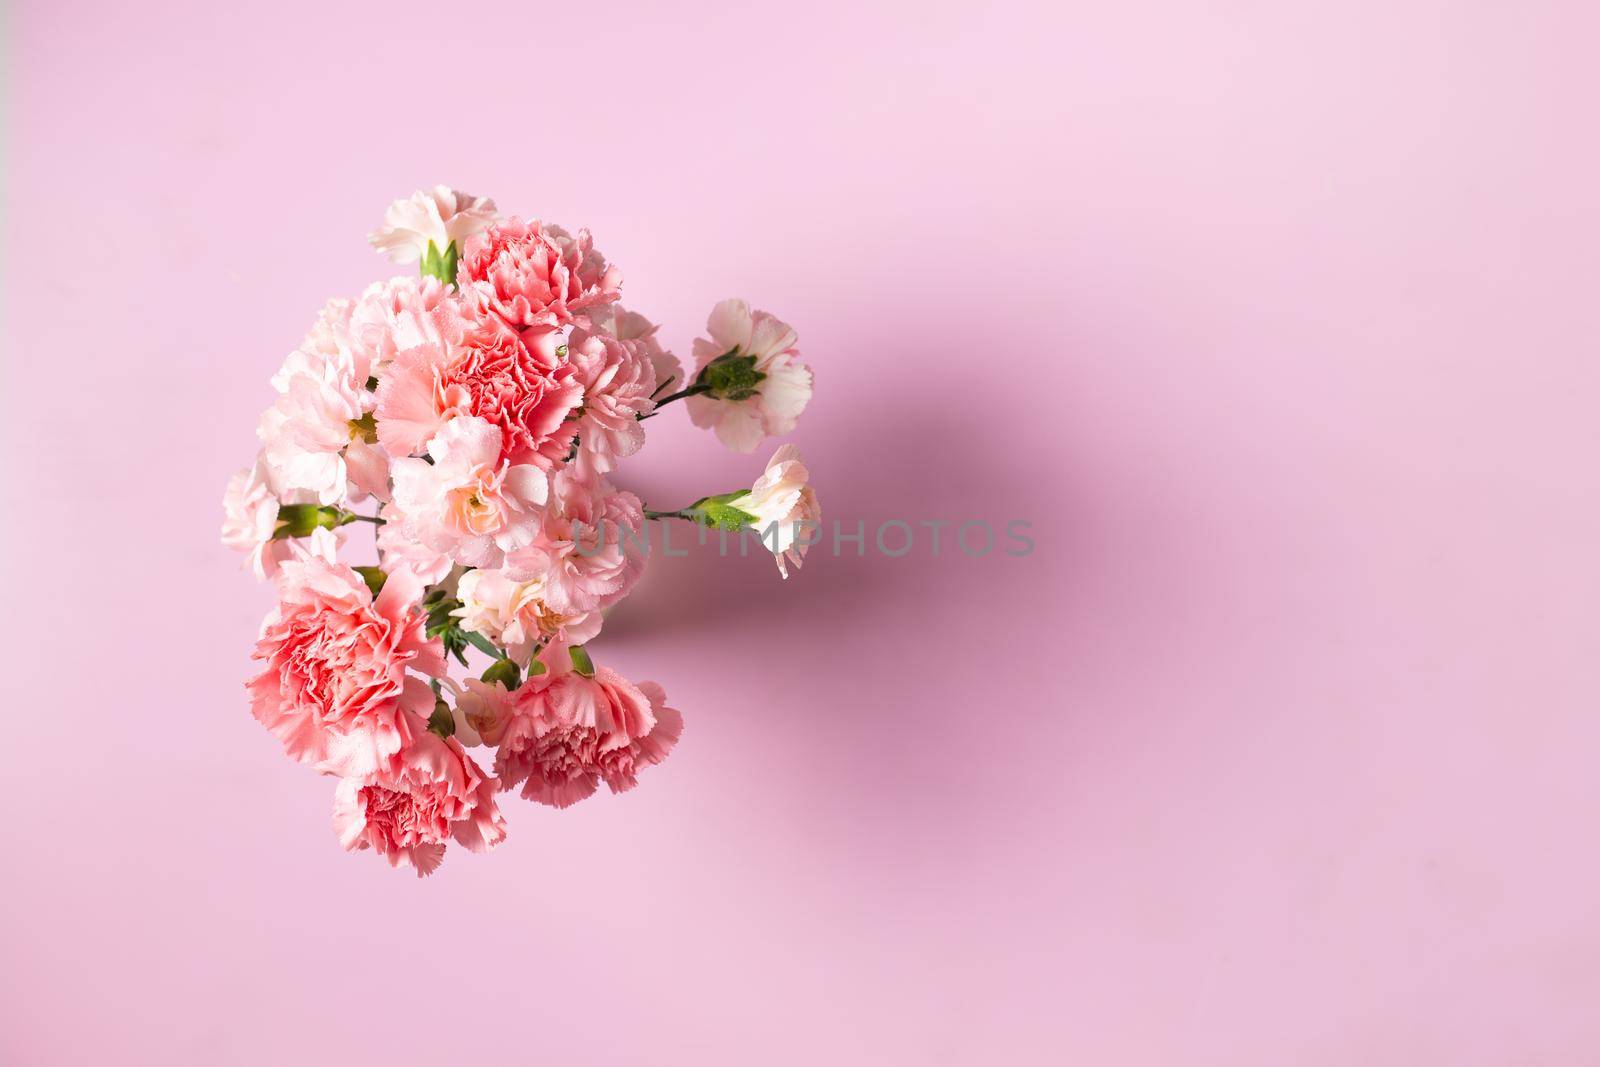 Carnation flowers on pink background by Wasant